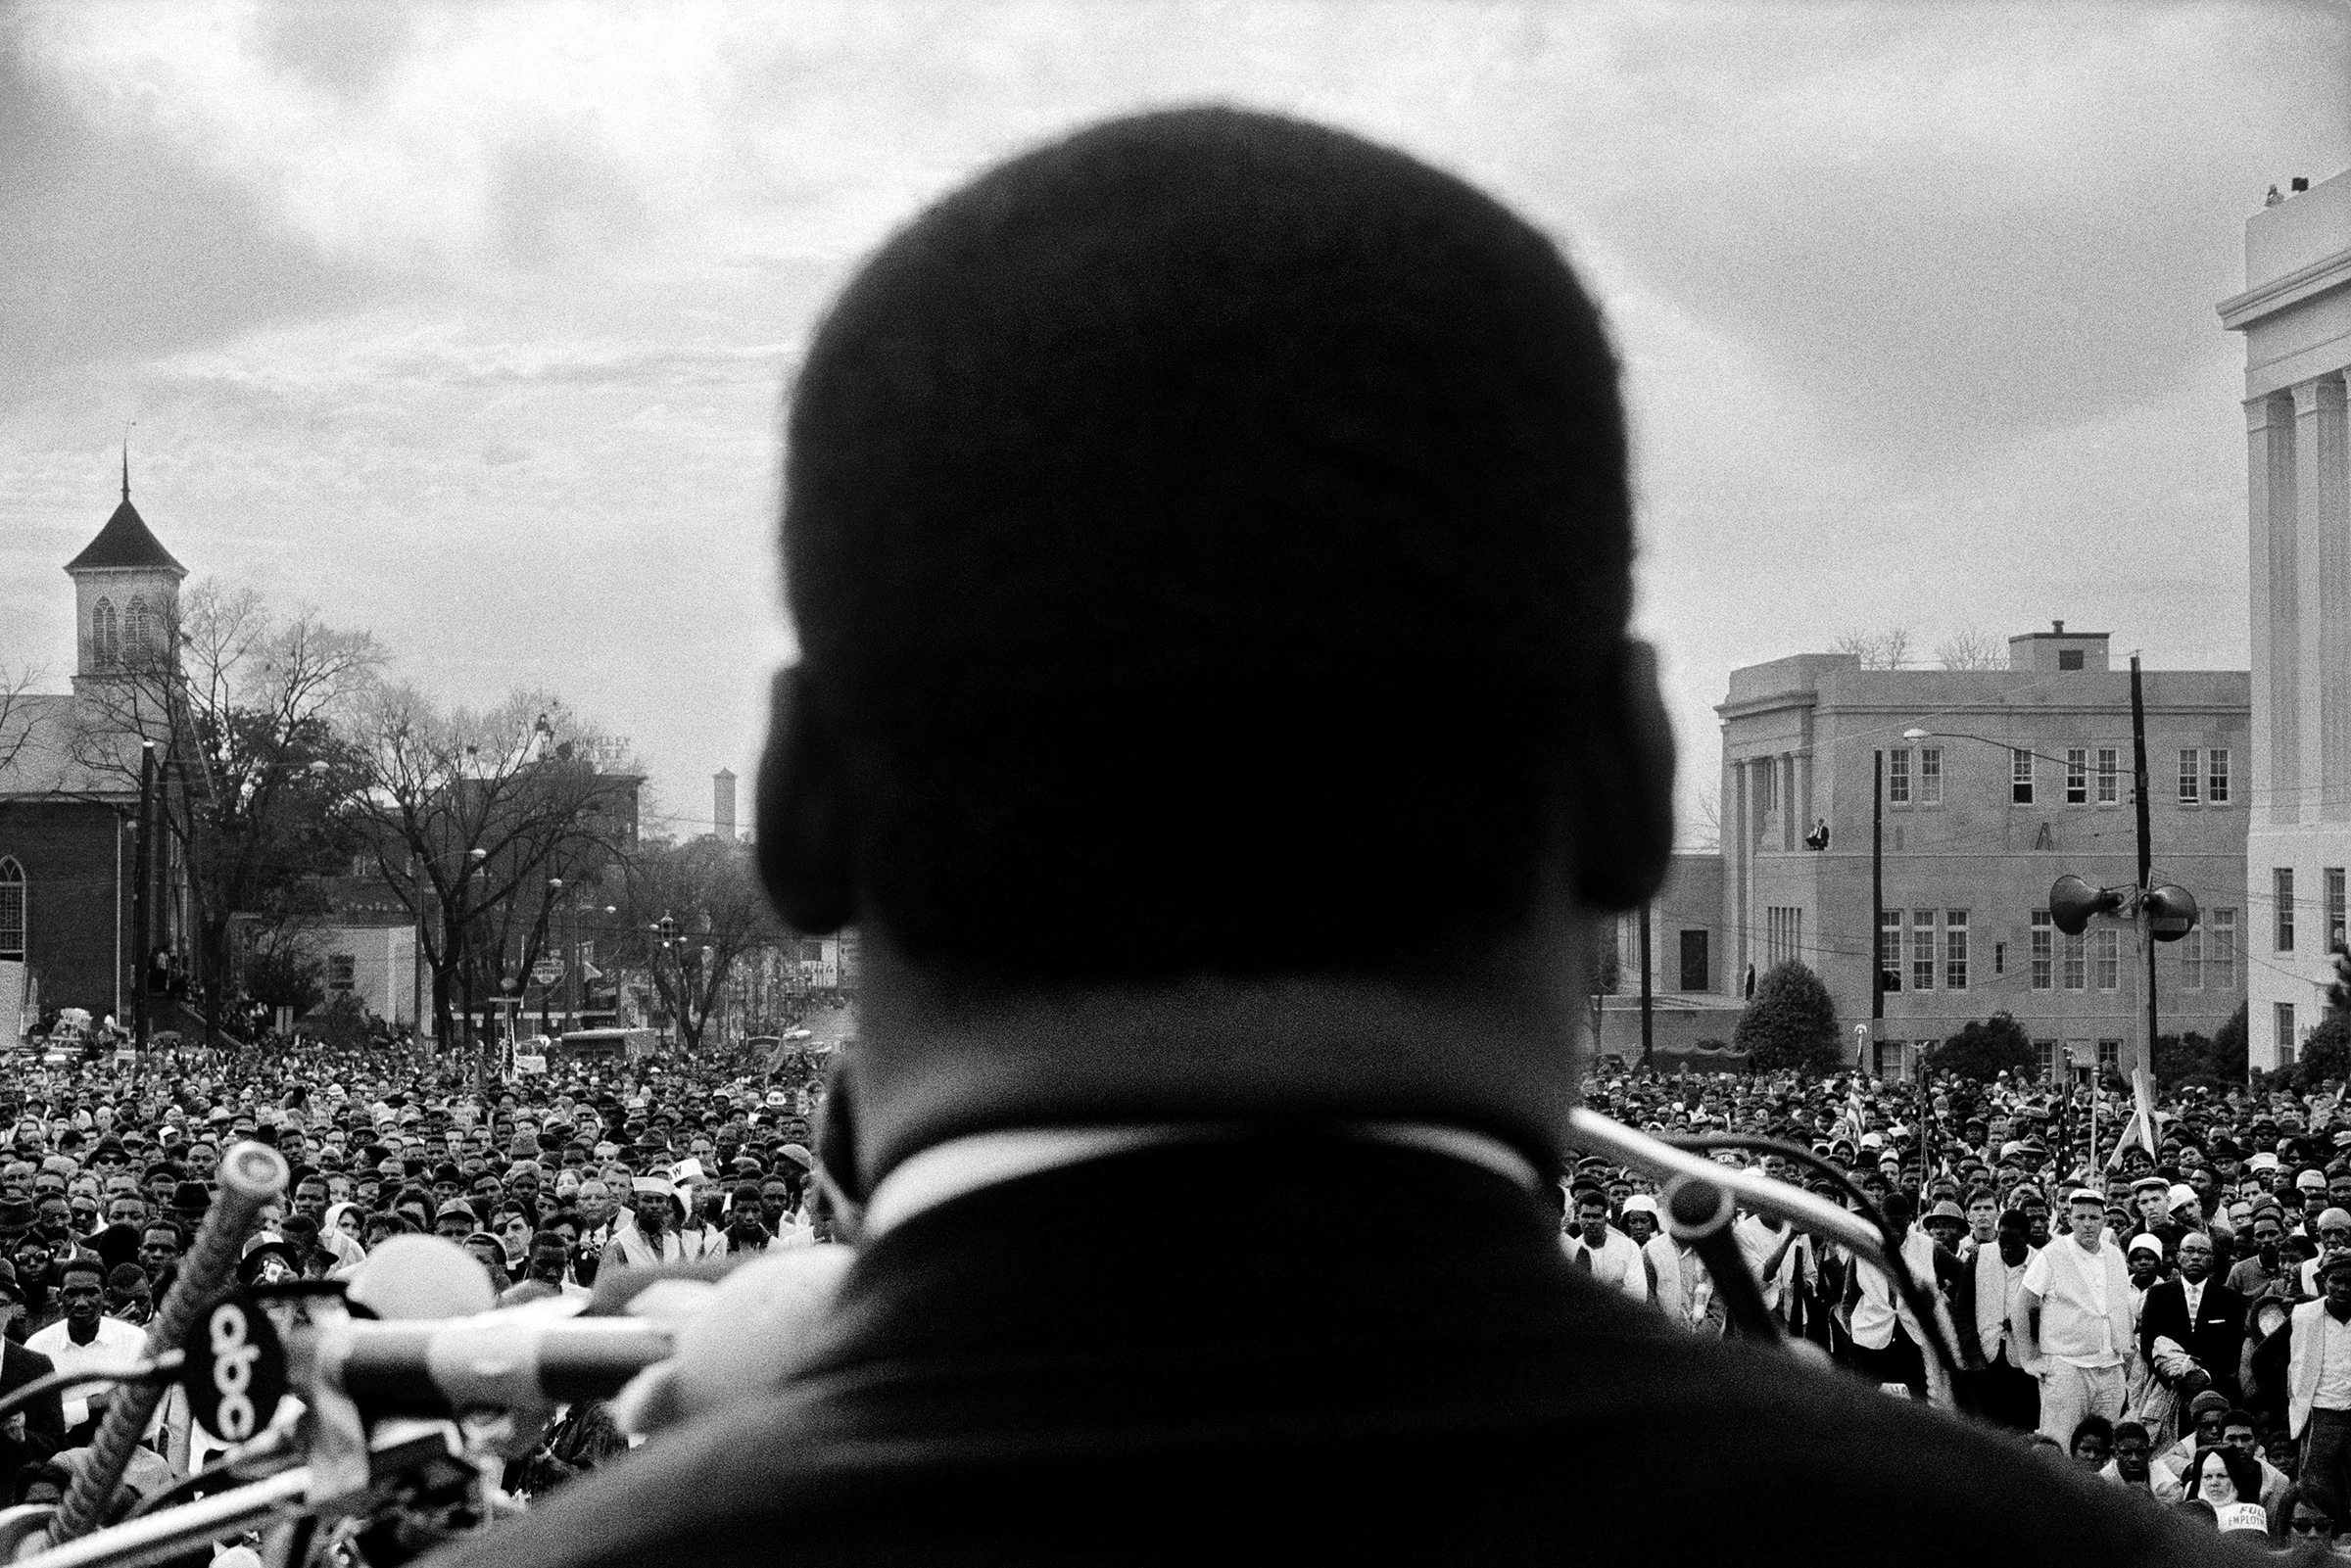 Dr. Martin Luther King, Jr. seen close from the rear, speaking to 25,000 civil rights marchers in front of the Alabama state capital building, at the conclusion of the Selma to Montgomery march, Montgomery, Alabama, March 25, 1965. (Stephen Somerstein—Getty Images)